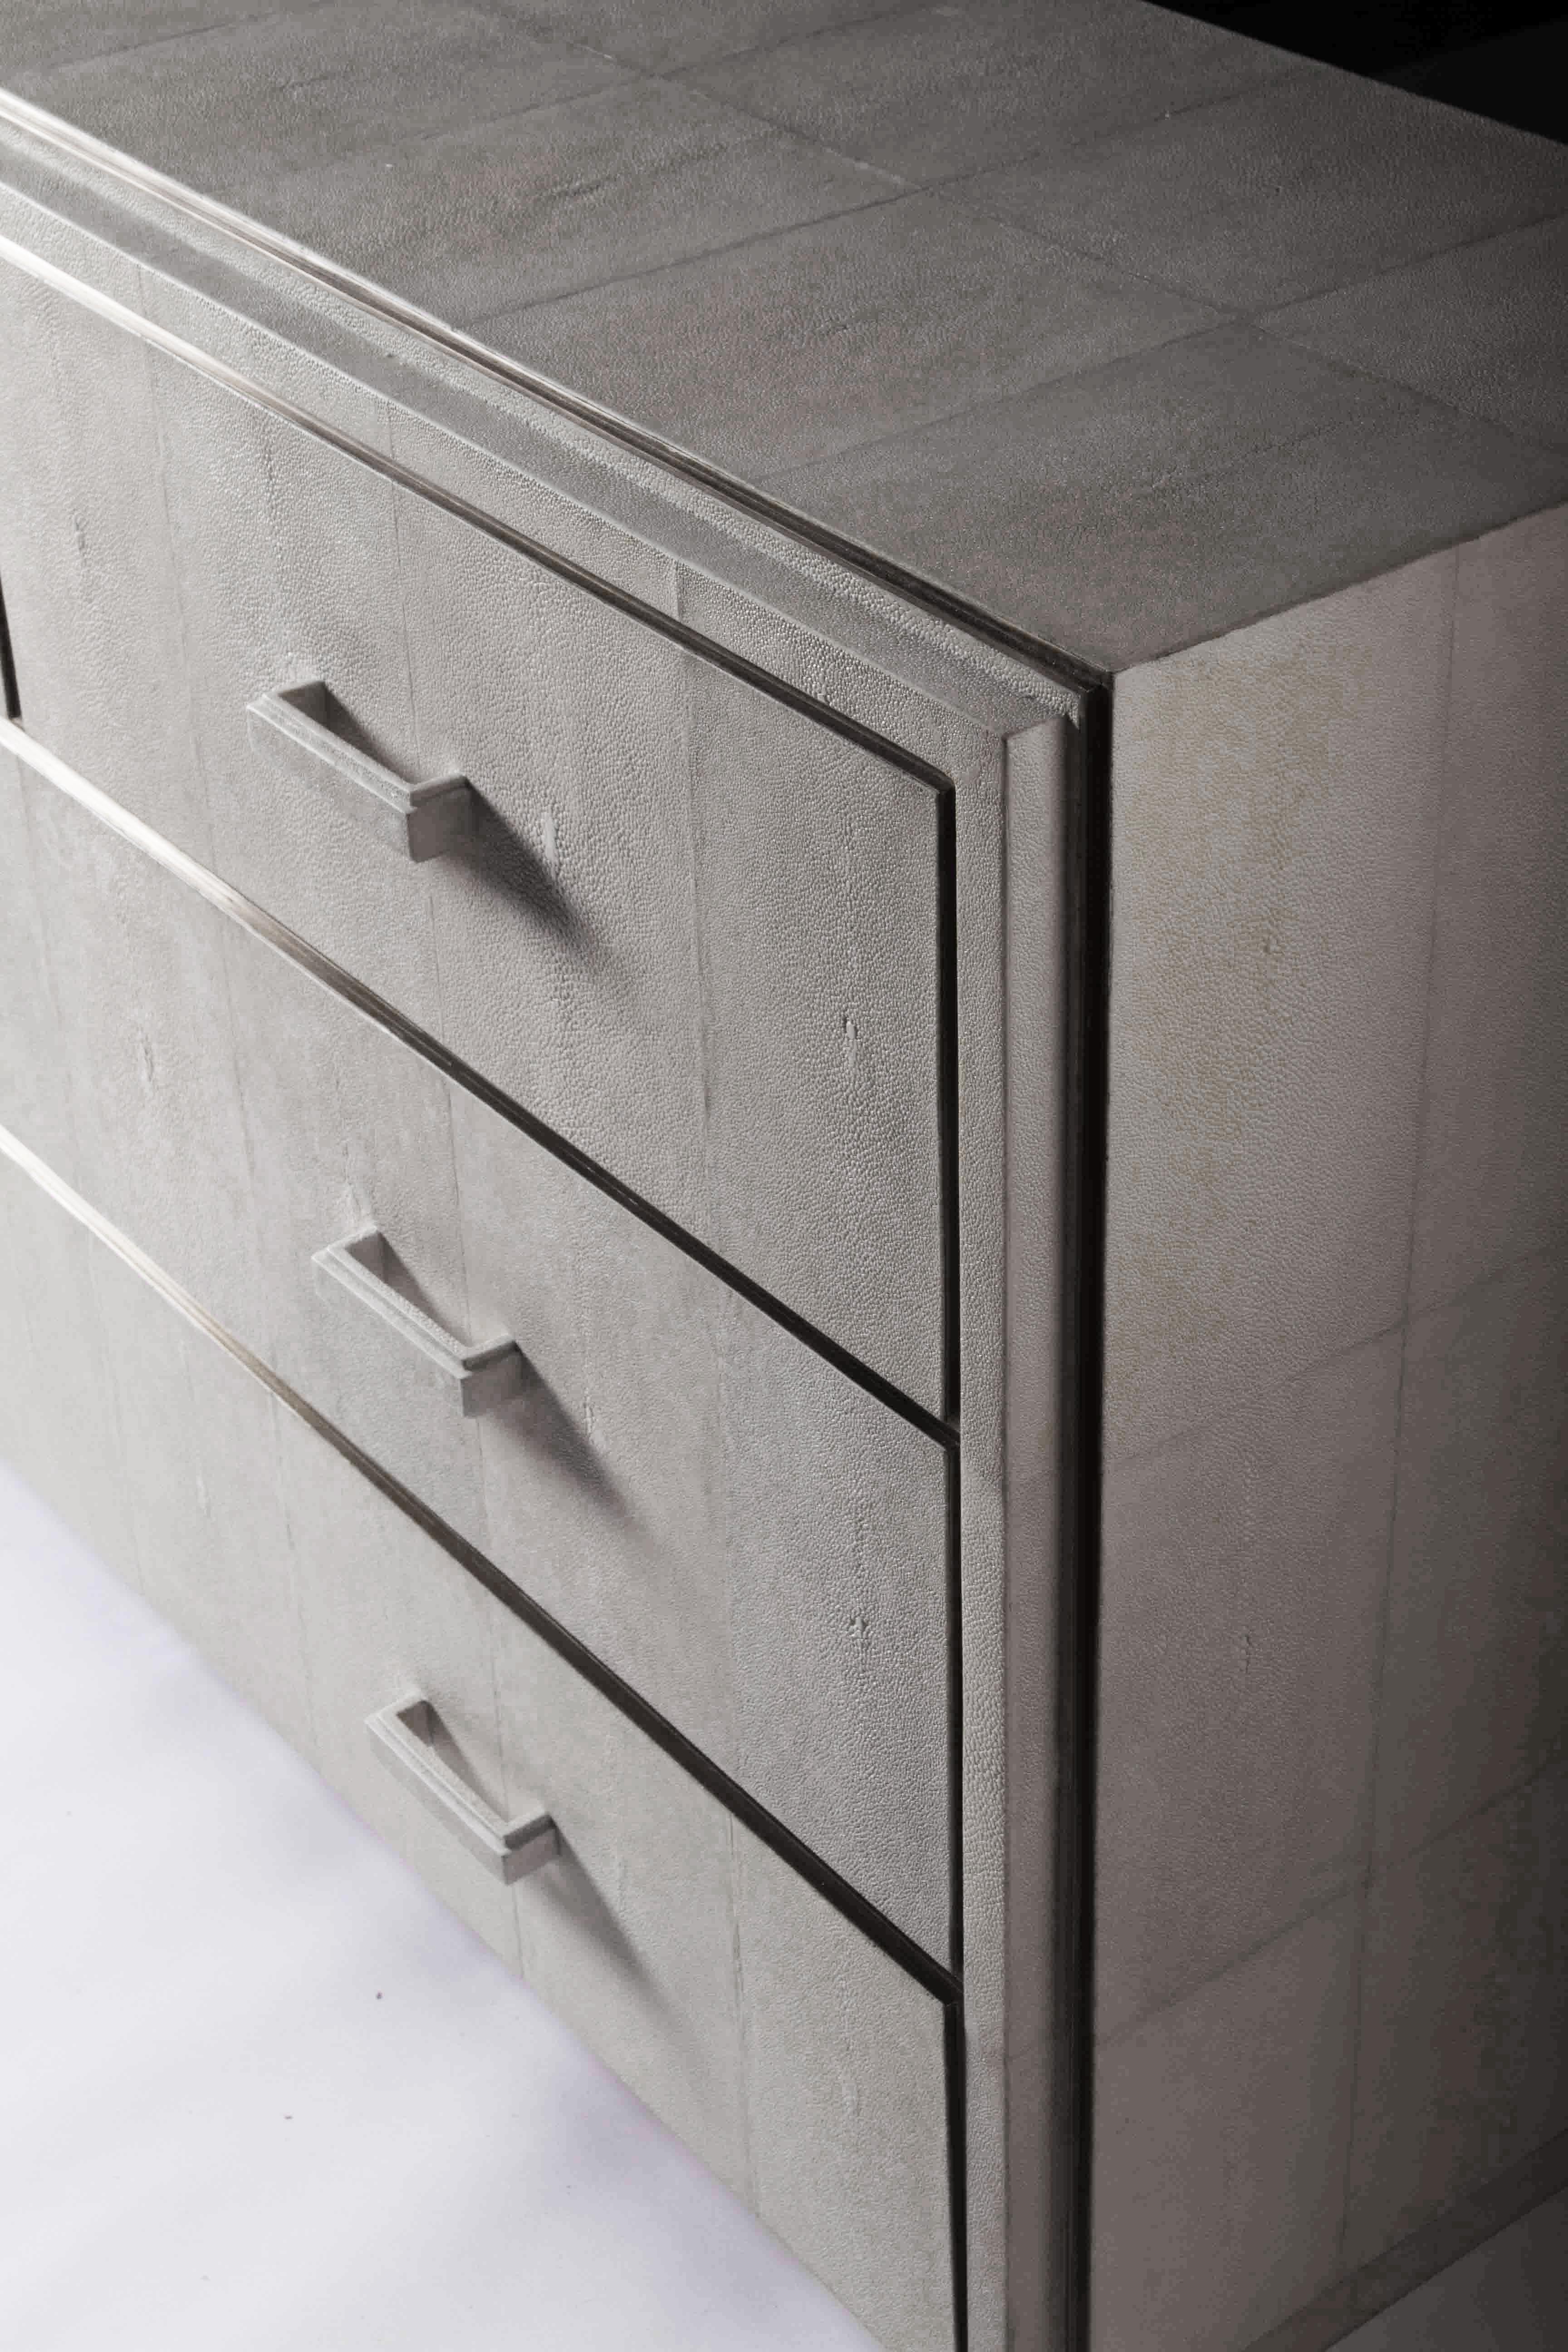 The Tomboy chest of drawers in cream shagreen is a classic piece that would suit any living style. The simplicity of the piece allows for the rich shagreen inlay to speak for itself. The inseams are inlaid with bronze-patina brass strips to add